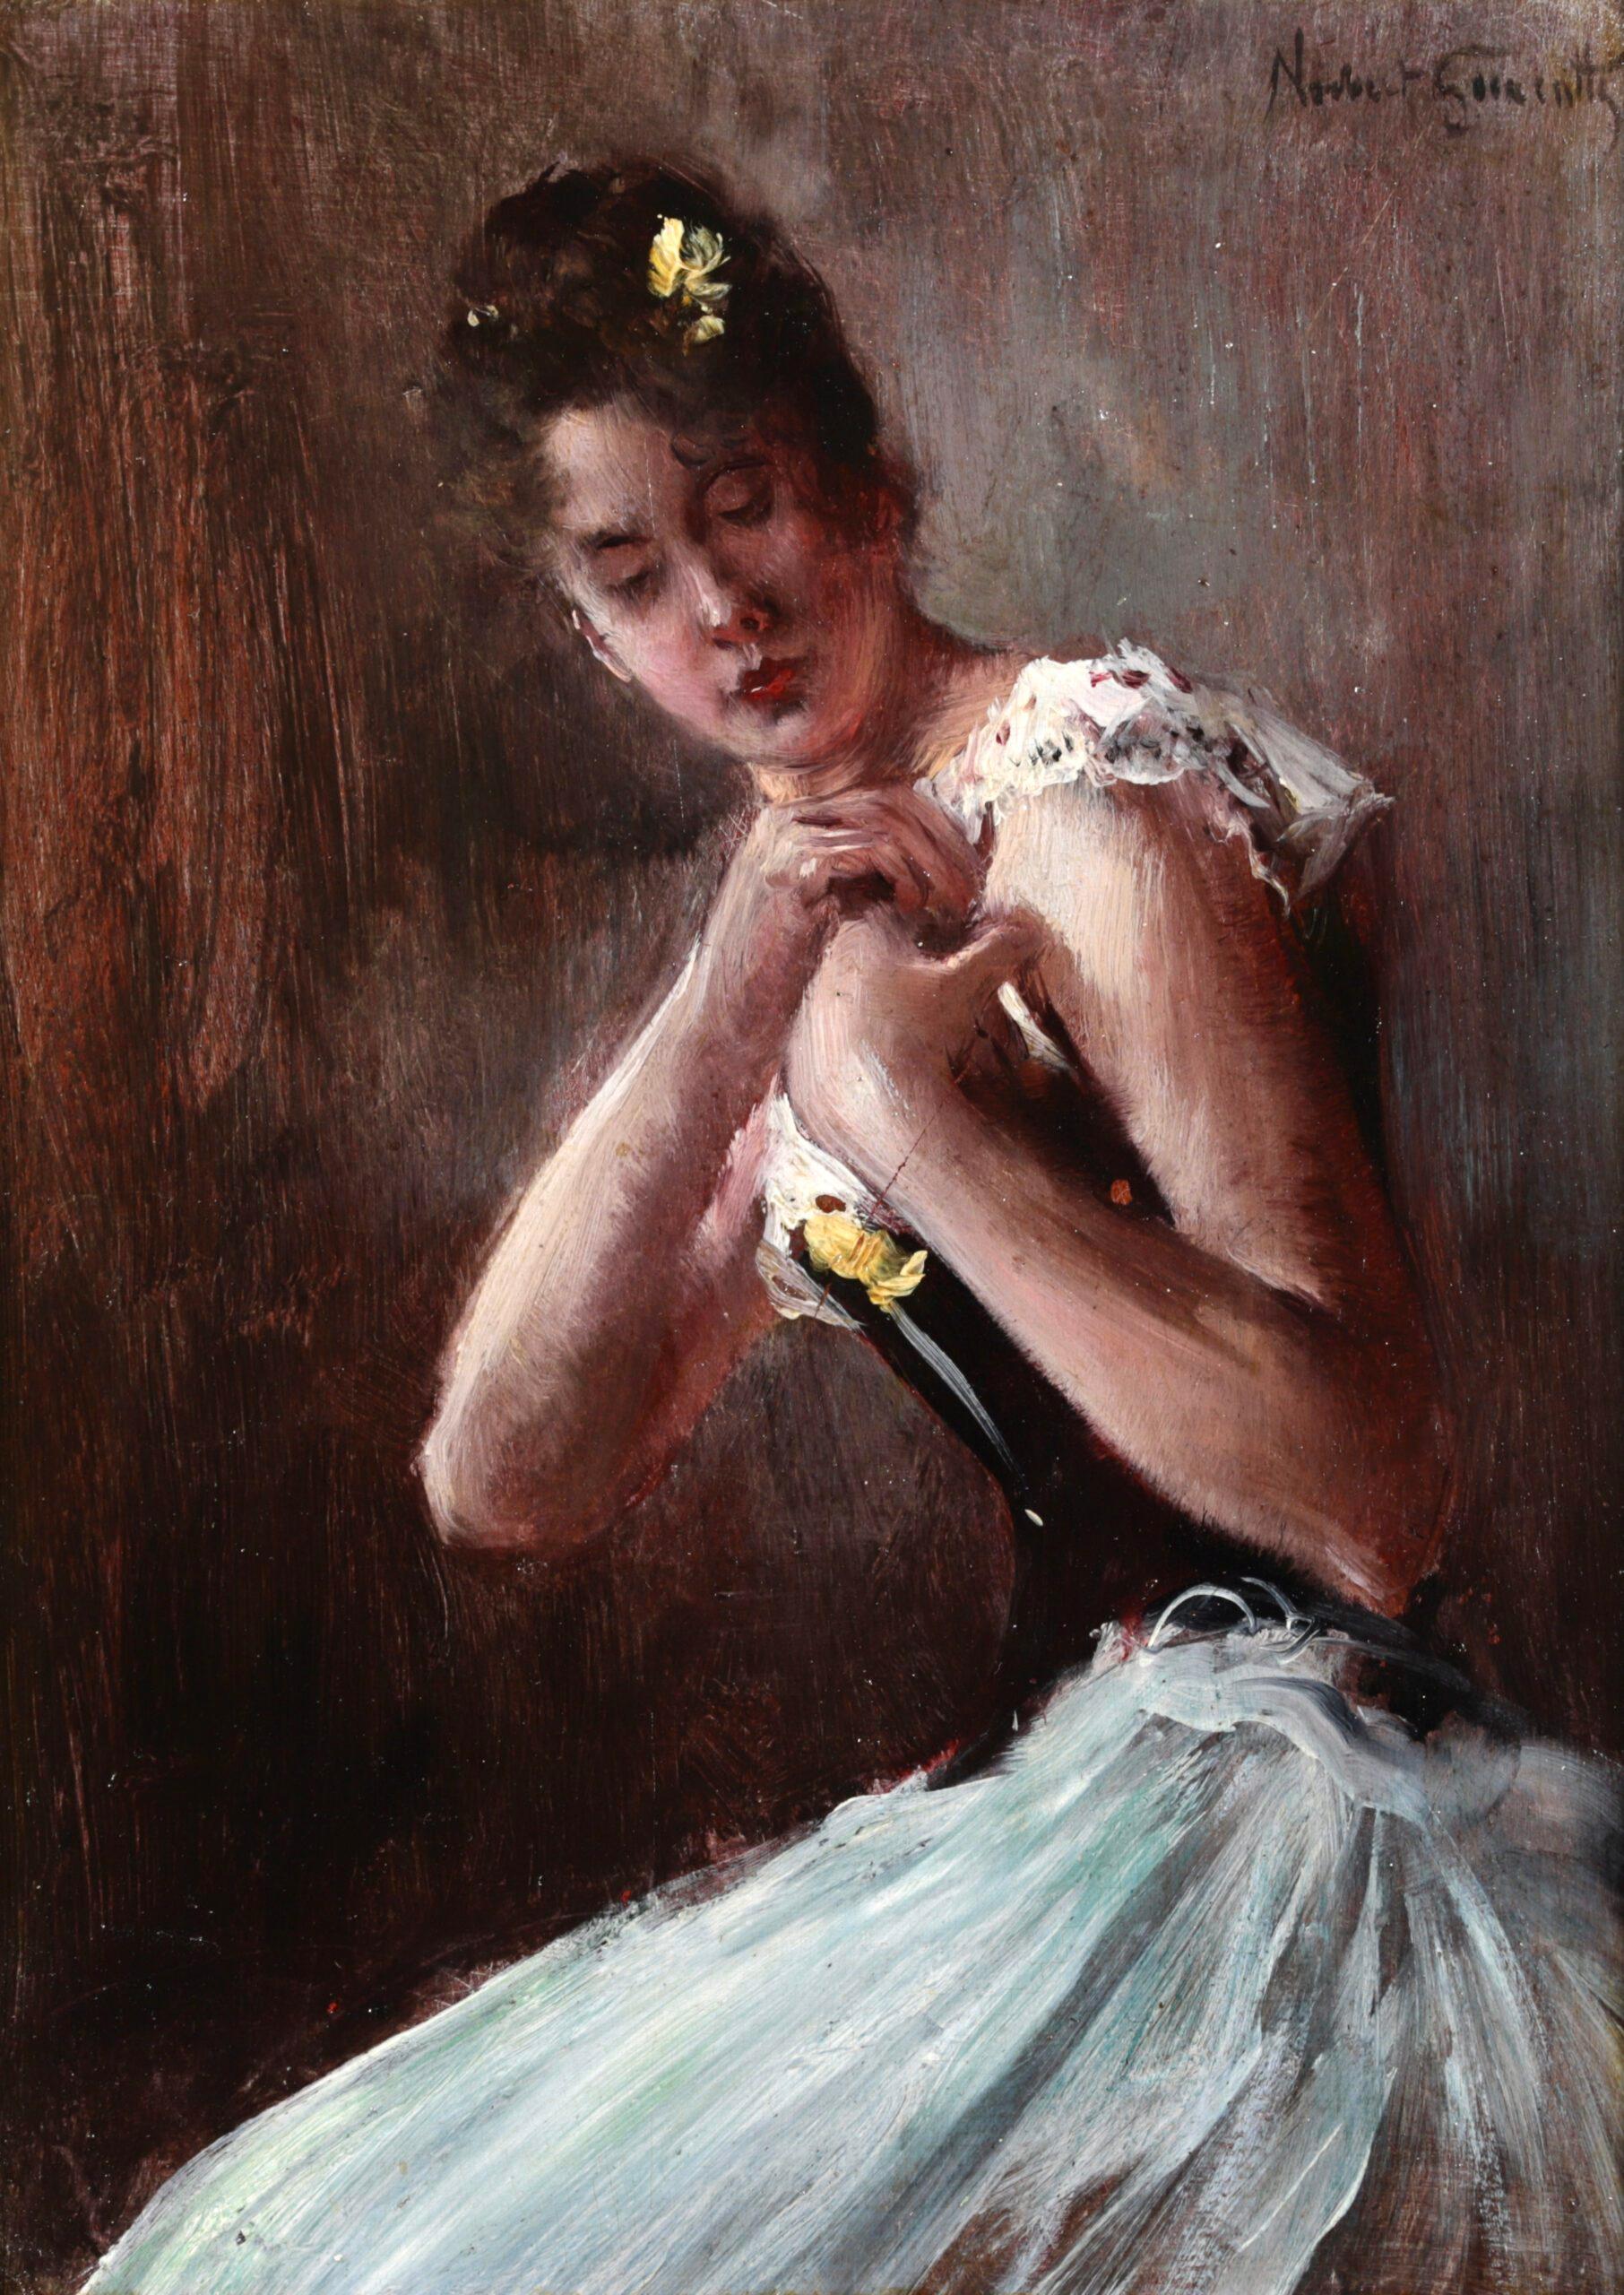 Dancer at the Opera - Impressionist Portrait Oil Painting by Norbert Goeneutte